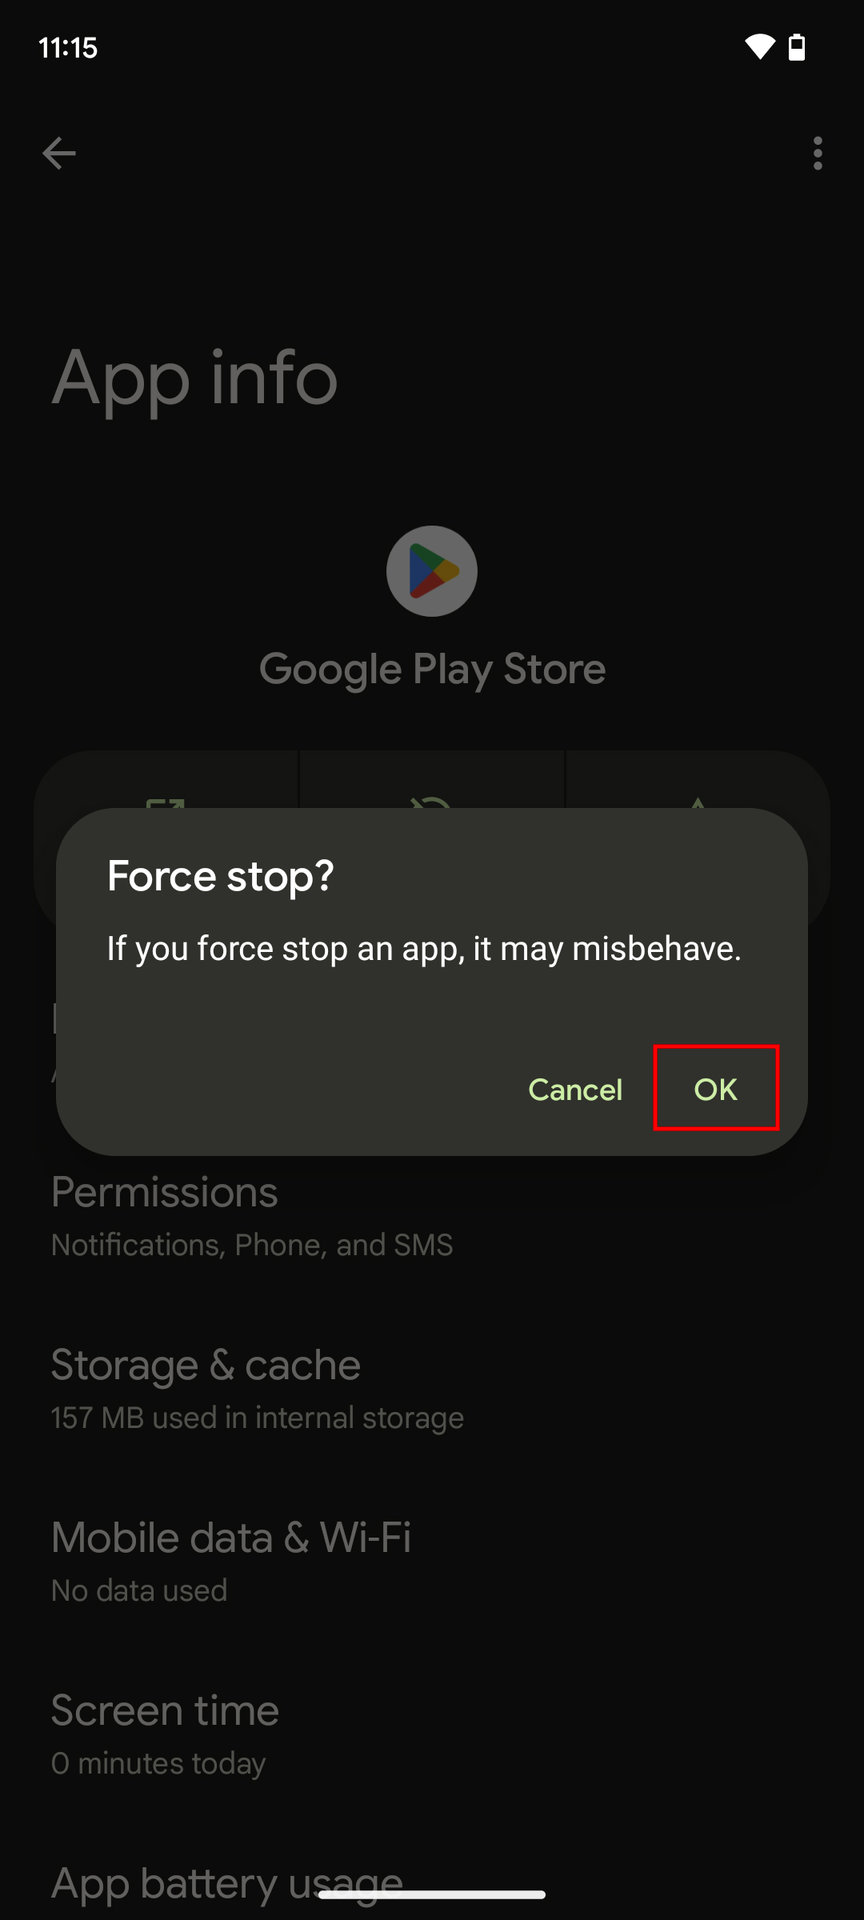 How to Fix It When the Google Play Store Is Not Working